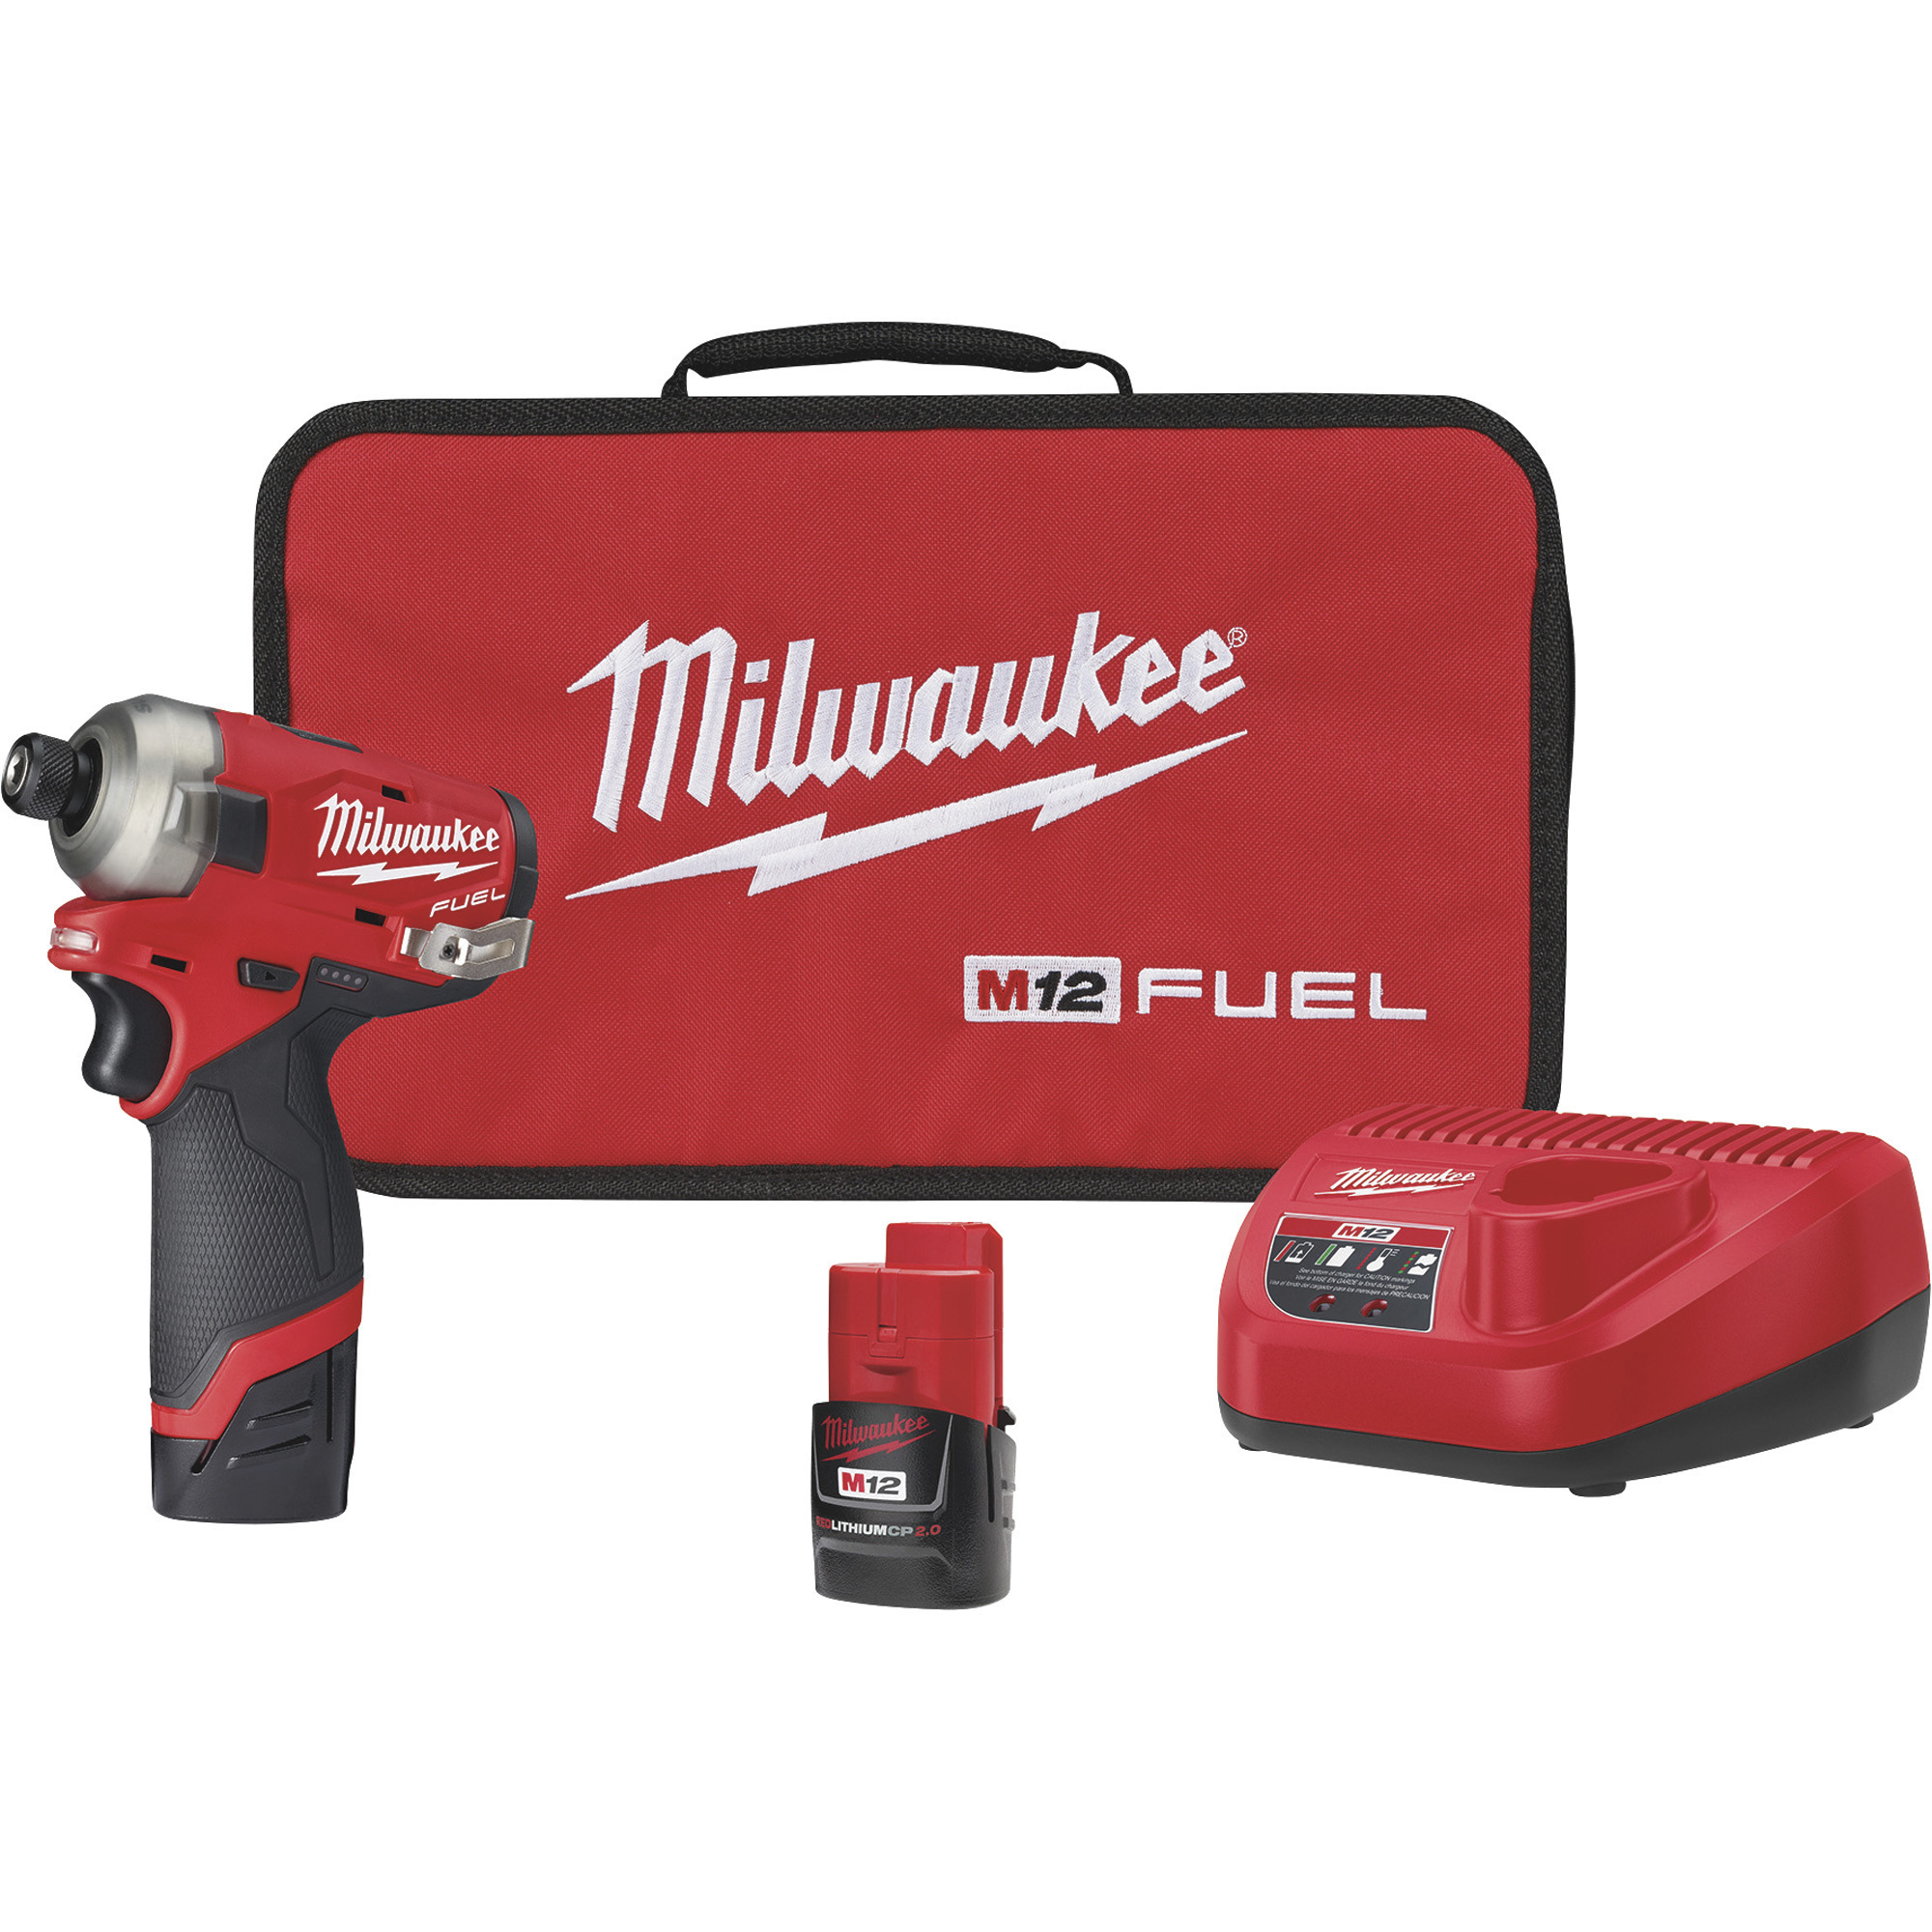 Milwaukee M12 FUEL Surge Cordless 1/4Inch Hex Hydraulic Driver Kit, 2 Batteries, Model 2551-22